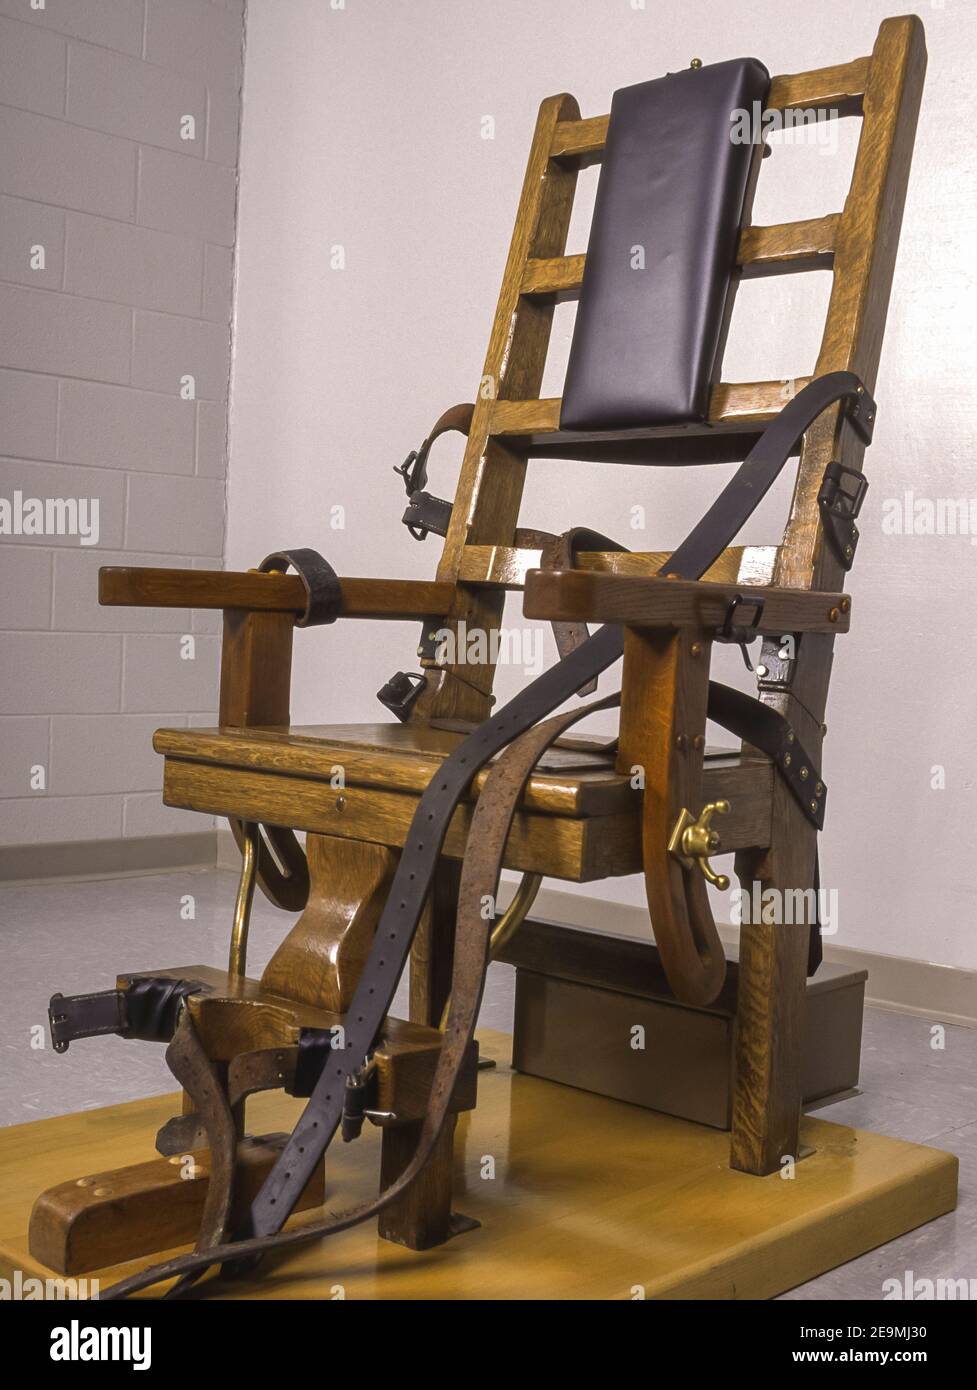 JARRATT, VIRGINIA, USA - Death penalty electric chair at Greensville  Correctional Center, for capital punishment Stock Photo - Alamy